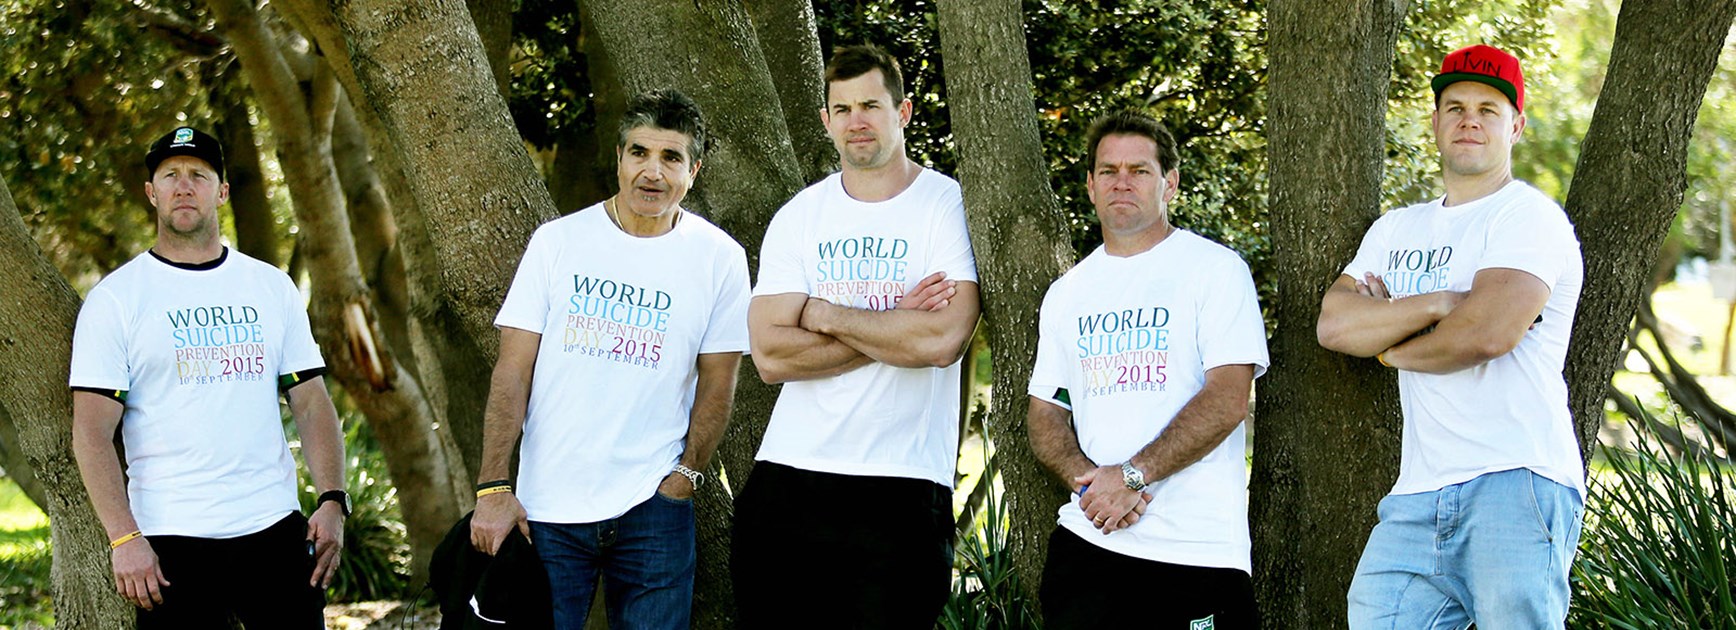 Shaun Timmins, Mario Fenech, Brenton Lawrence, Brett Kimmorley and Dan Hunt got together to promote World Suicide Day.